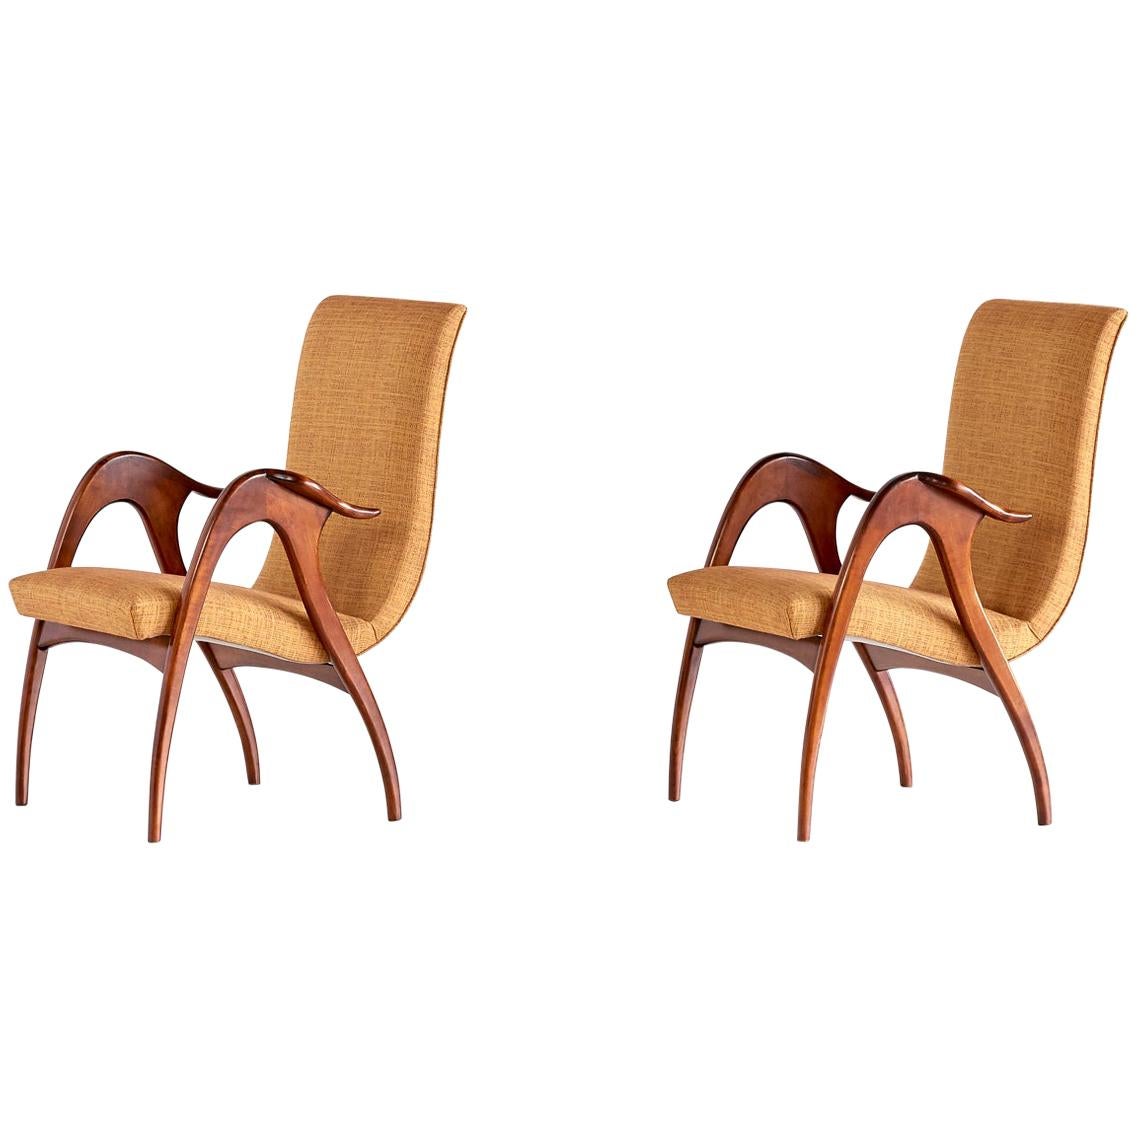 Malatesta and Mason Pair of Sculptural Armchairs in Walnut, Italy, Early 1950s